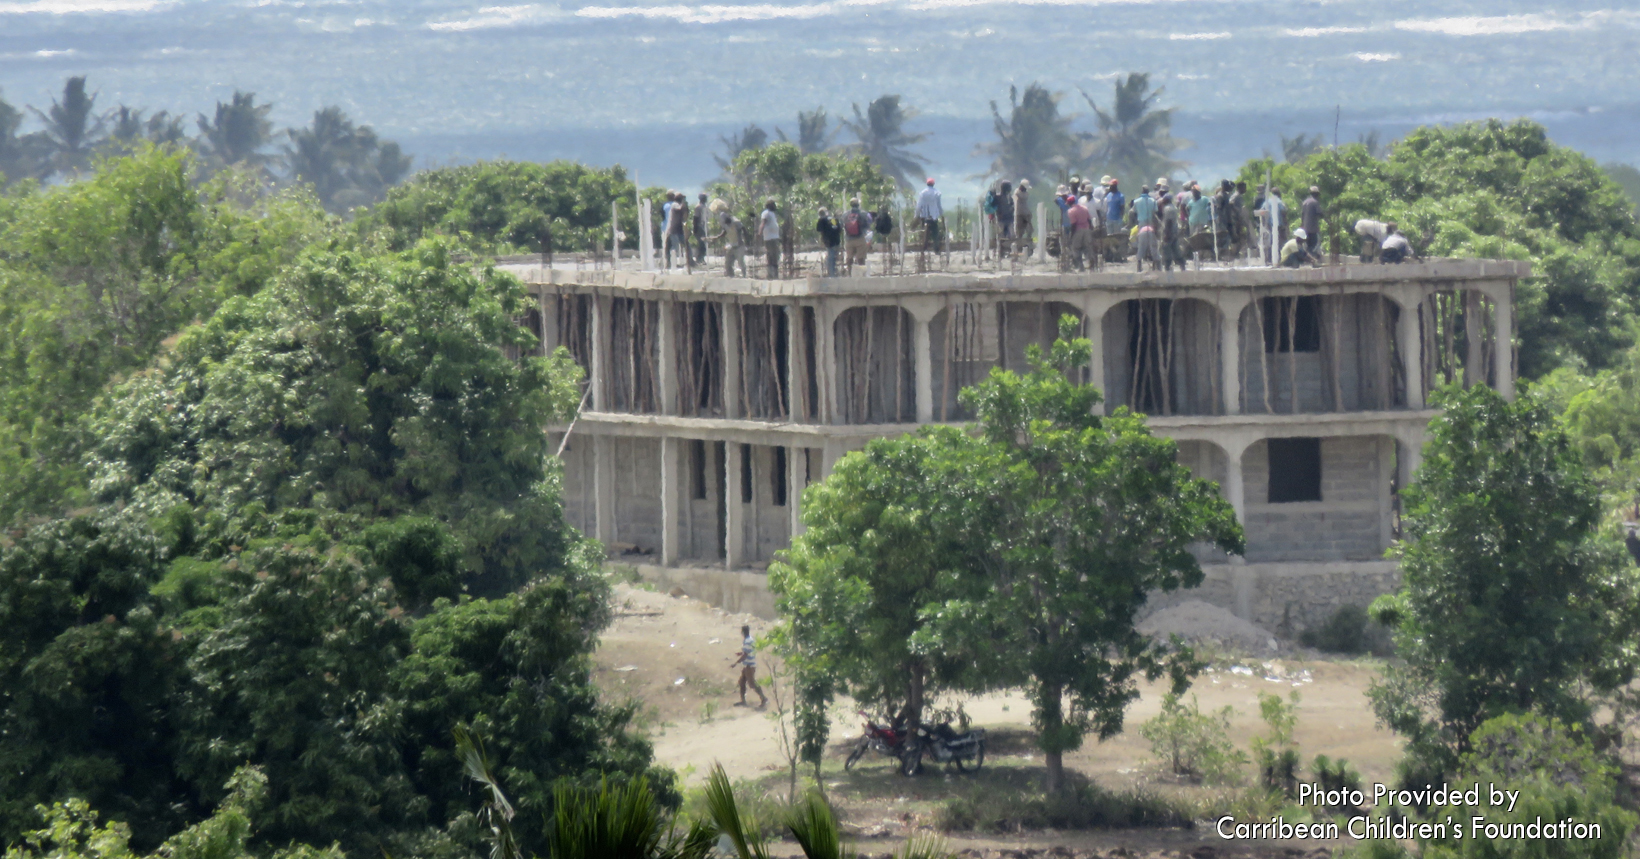 In August 2019, when it was time to put the roof of the second floor on the building, over 100 people showed up to work and celebrate this big blessing for the island. The only payment they wanted was a meal of rice and beans at the end of the day. People came to mix mortar, transport water to the worksite bucketload by bucketload, prepare the meal for the workers, hoist cement up to the roof, lay cement on the roof and many other tasks. This photo shows some of the workers on top of the building as they completed laying down the thick layer of cement.